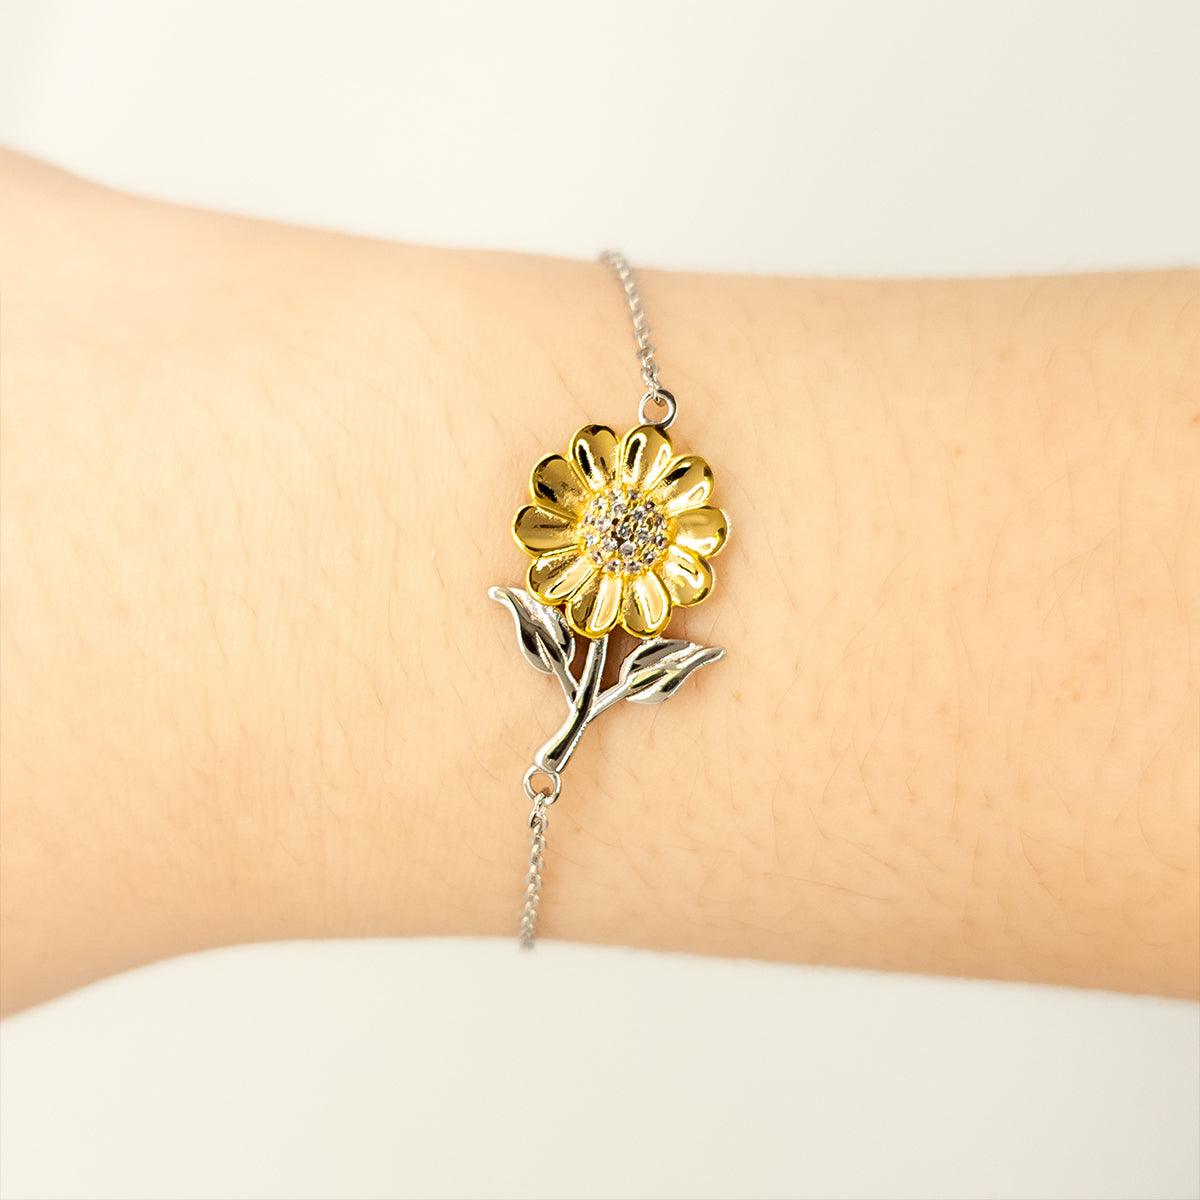 Vermont is my home Gifts, Lovely Vermont Birthday Christmas Sunflower Bracelet For People from Vermont, Men, Women, Friends - Mallard Moon Gift Shop